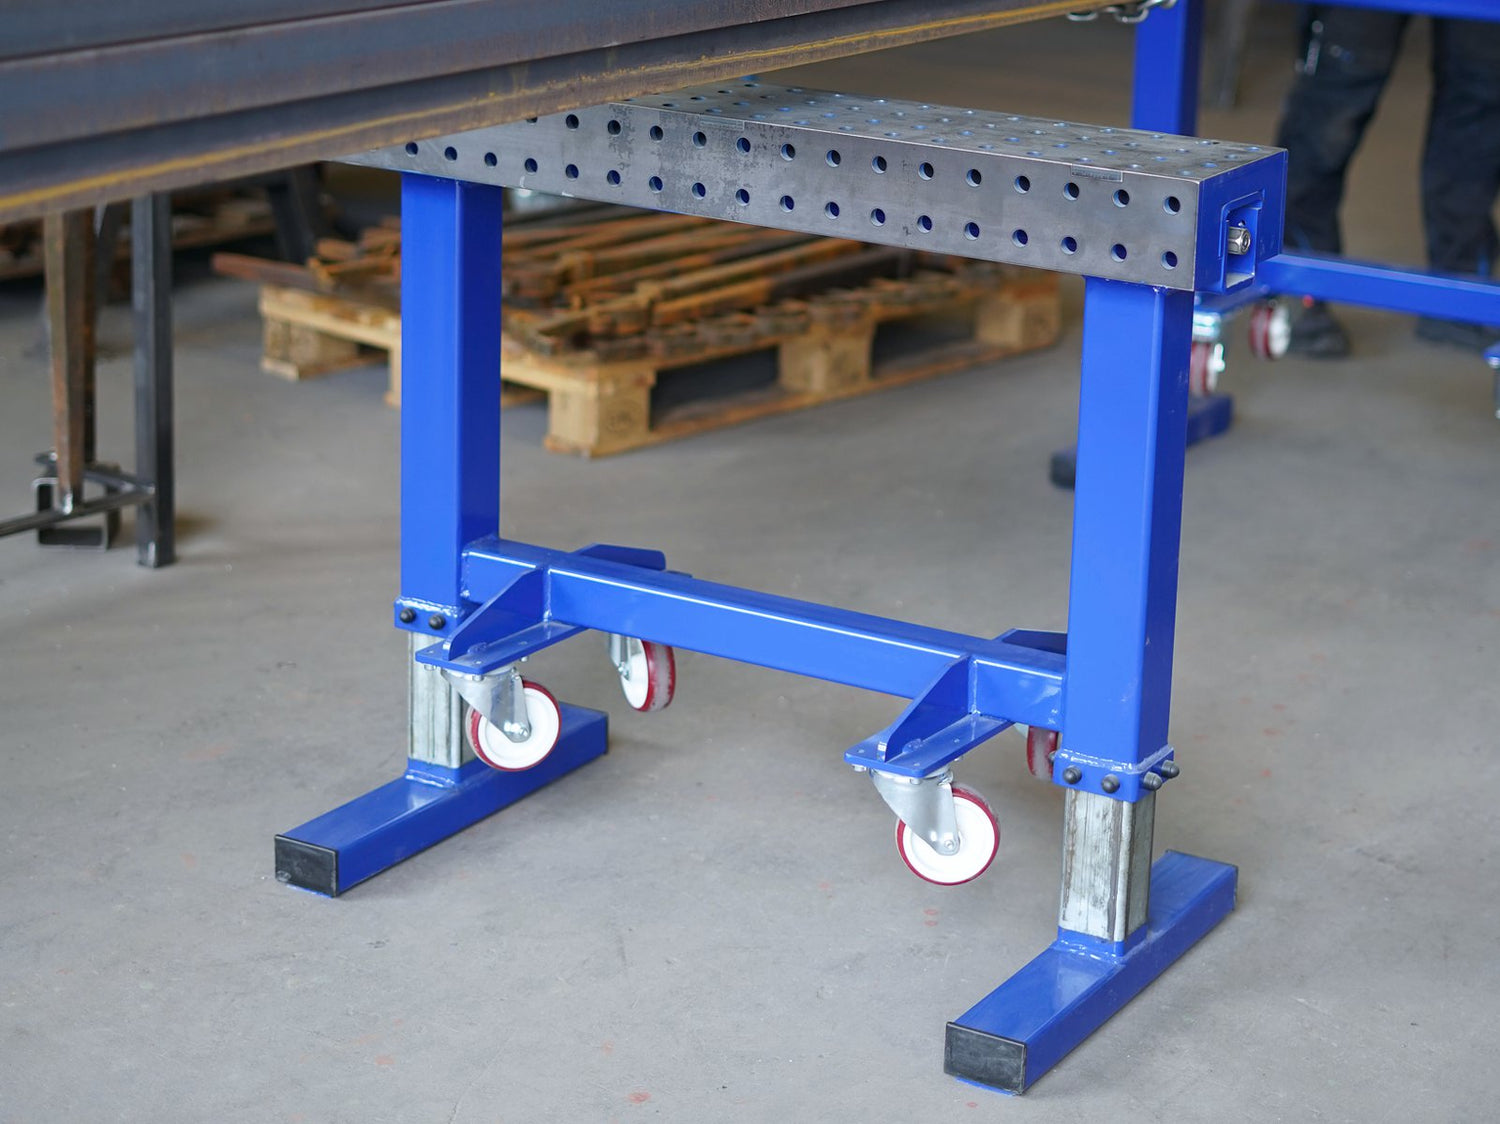 Adjustable heavy duty axle stands with Spindle System